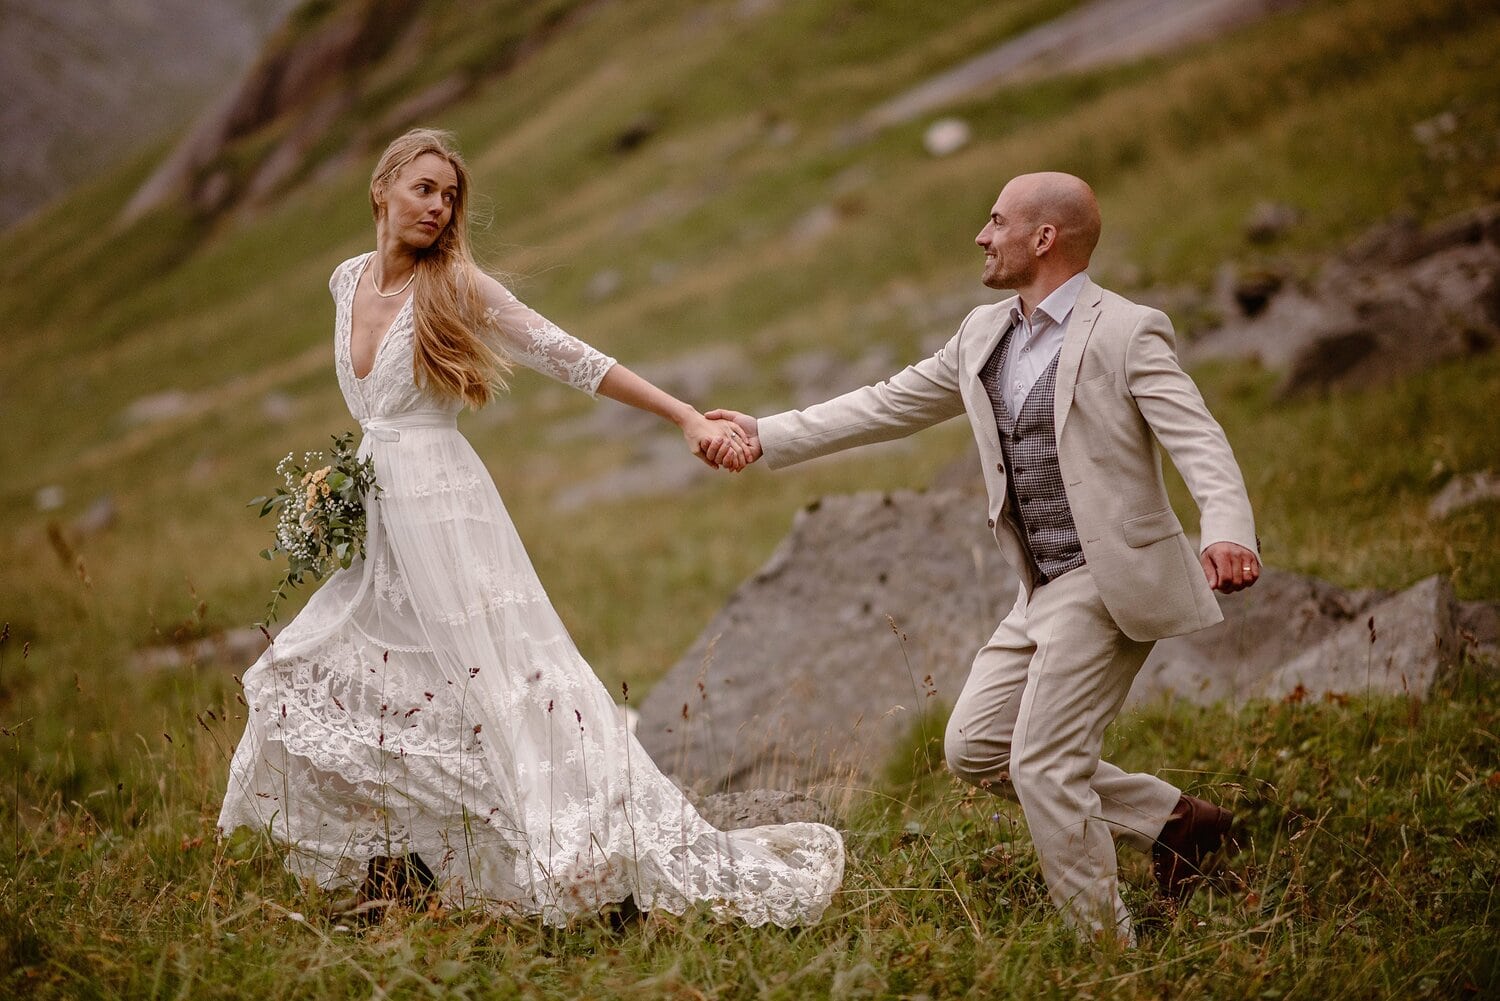 Bride and groom hold hands and look into each others eyes on their elopement day in Norway.